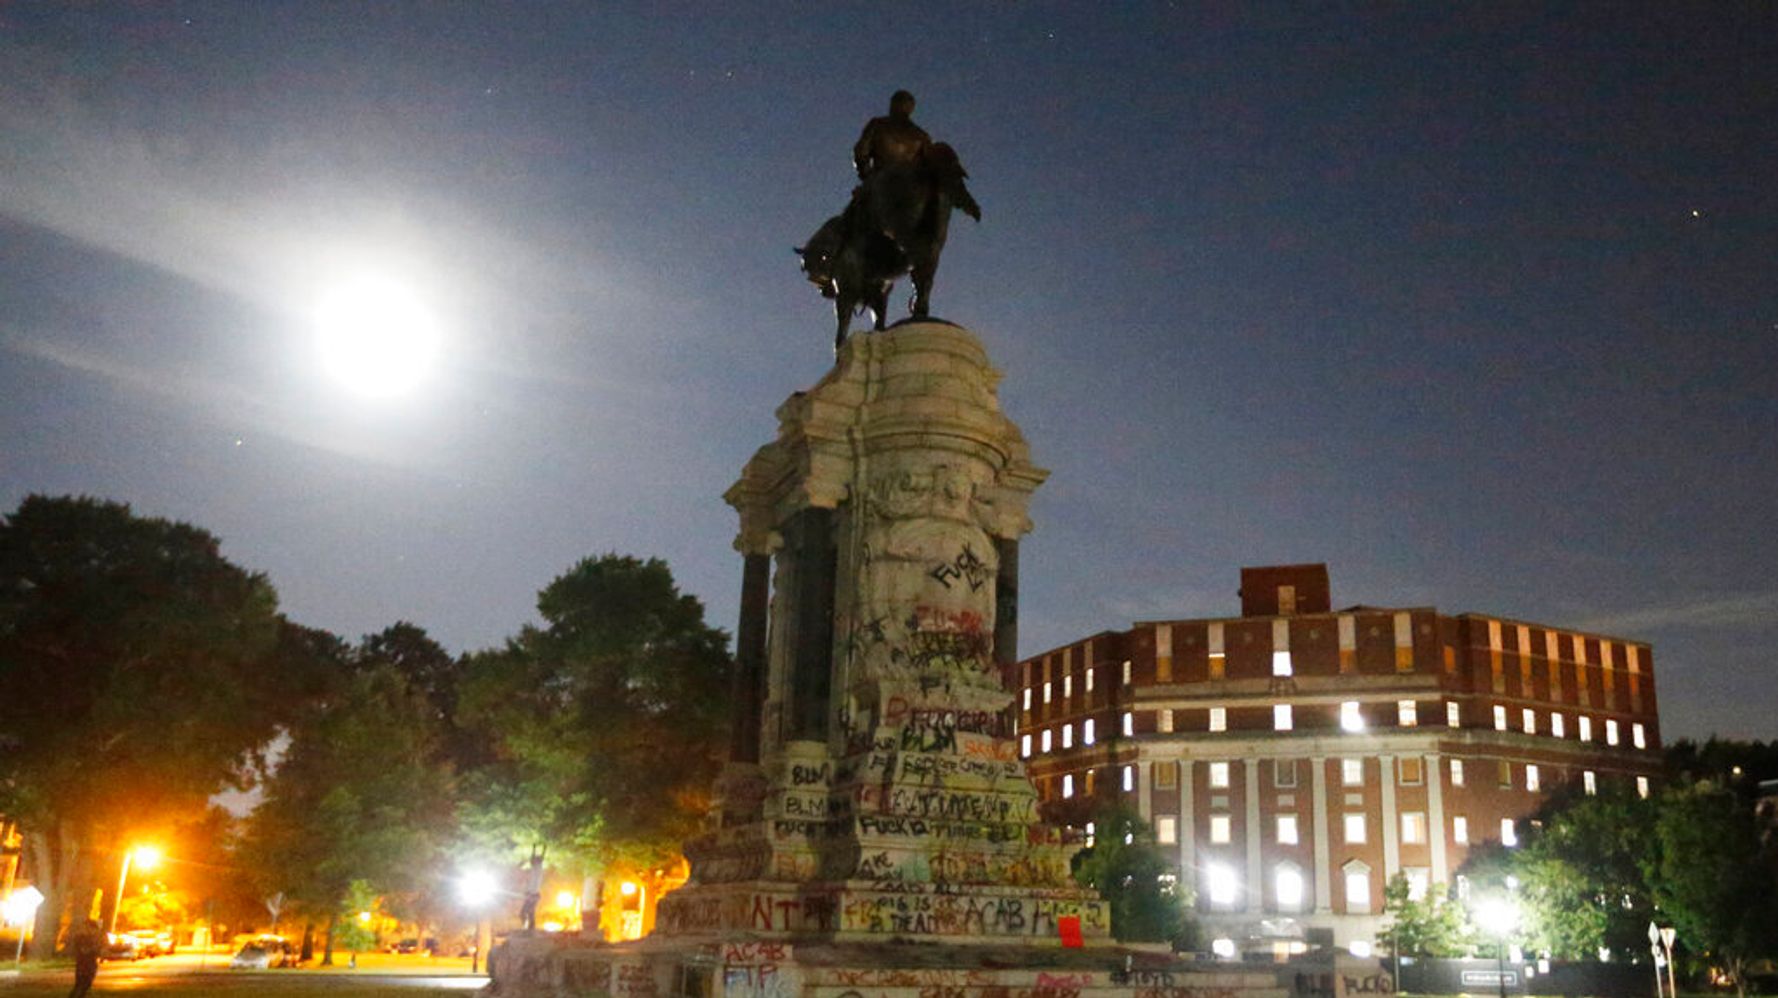 Gen. Robert E. Lee Statue Can Be Removed From Richmond: Virginia Supreme Court